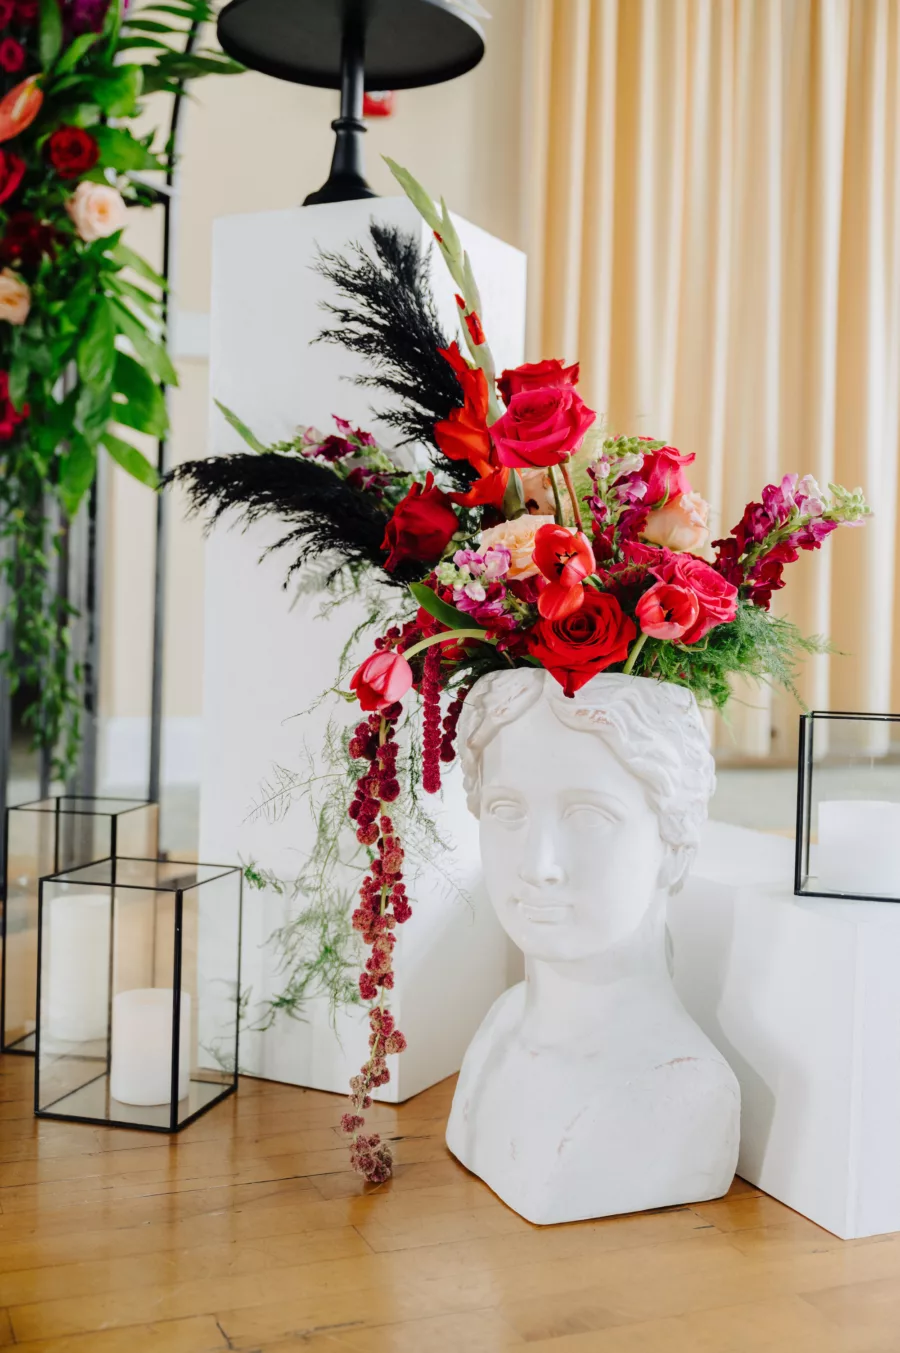 Modern Wedding Cake Table Decor Ideas | Bust with Pink and Red Roses, Black Pampas Grass, and Greenery Flower Arrangement Inspiration